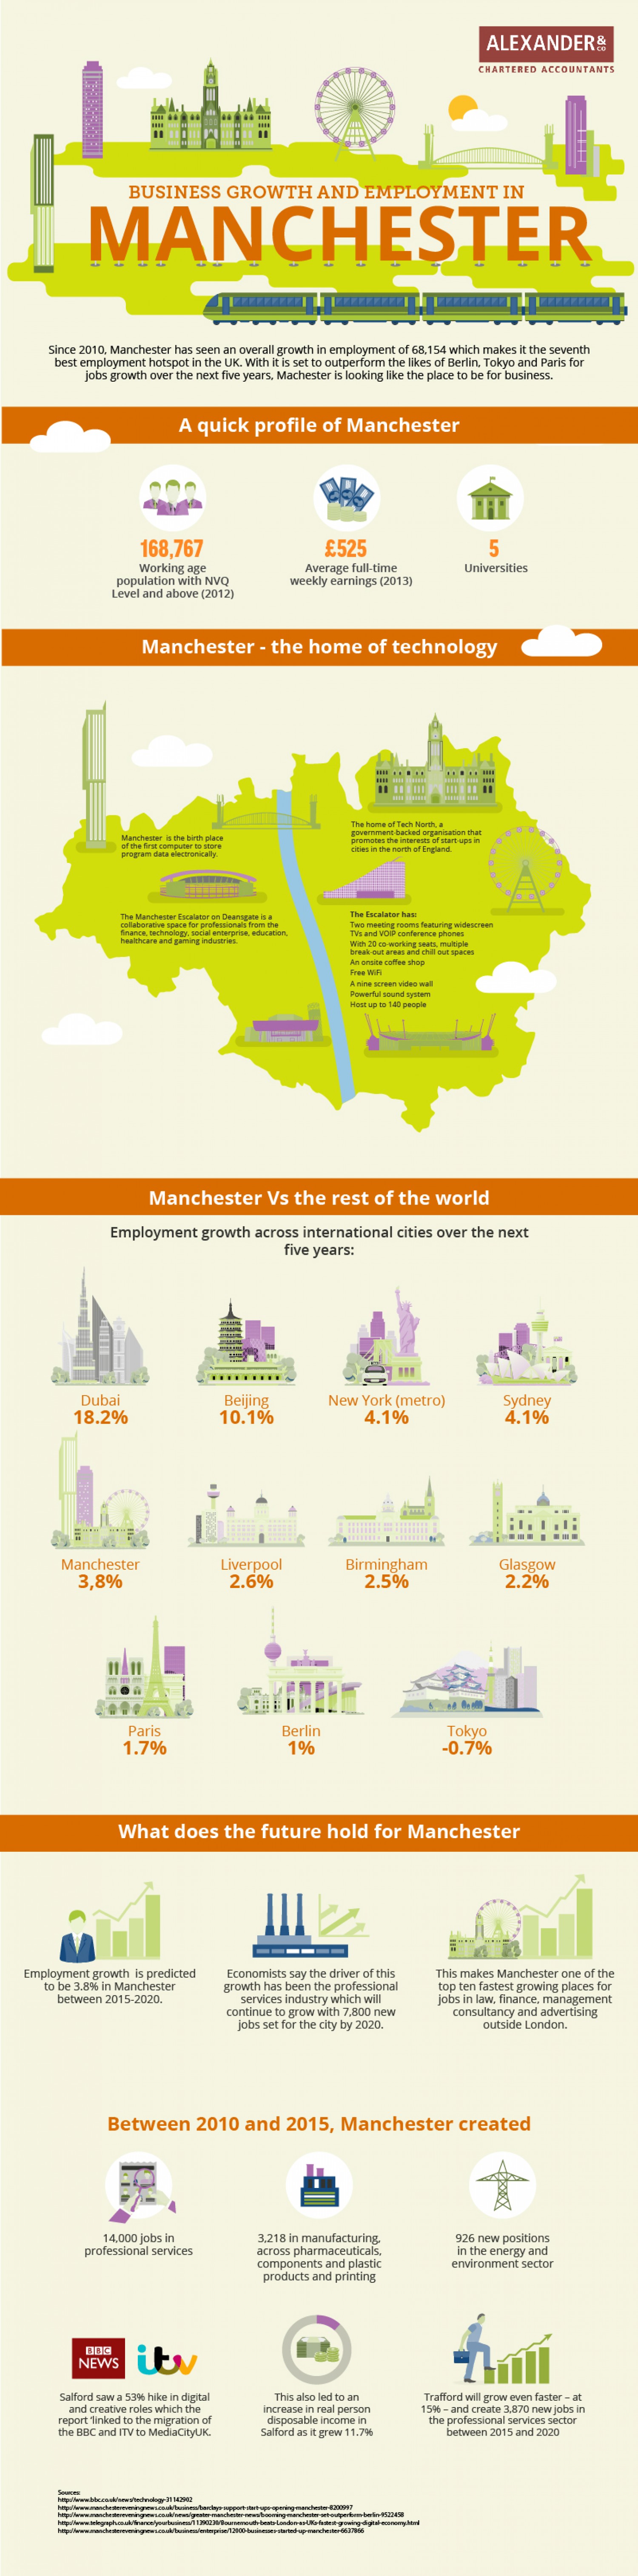 Business Growth in Manchester - Infographic